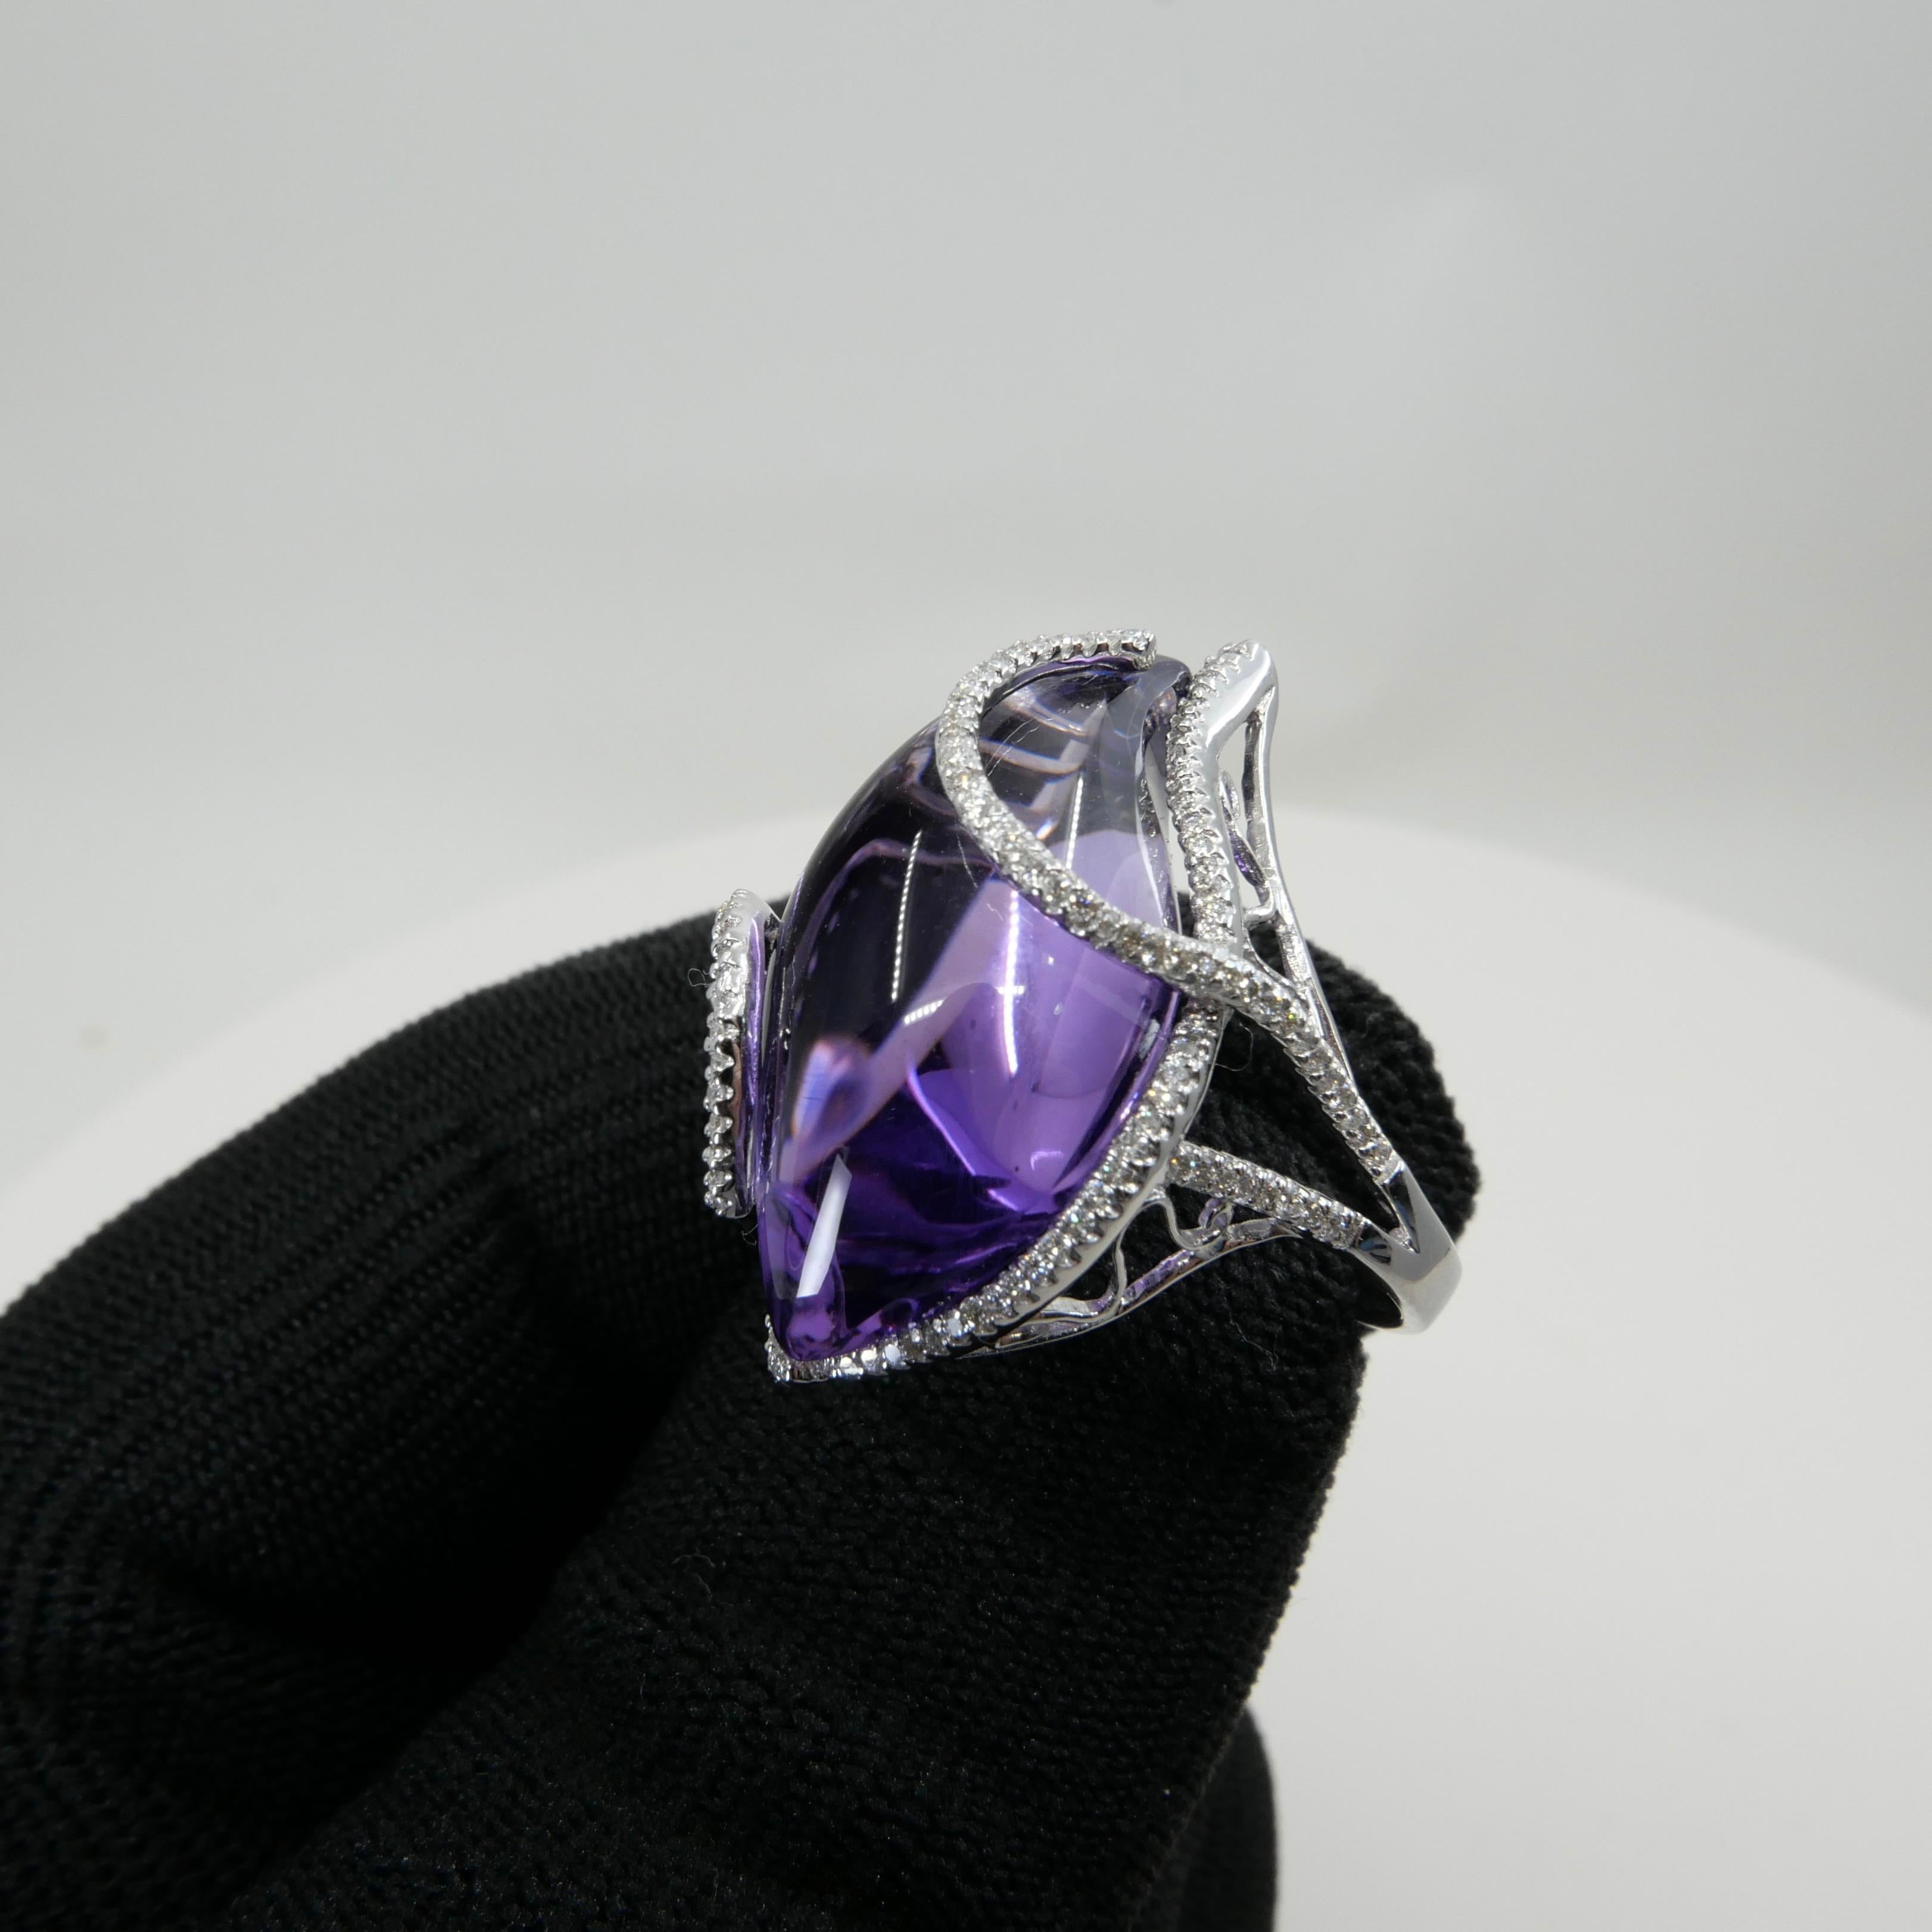 Women's 23 Carat Amethyst & Diamond Cocktail Ring. Large Contemporary Statement Ring.    For Sale